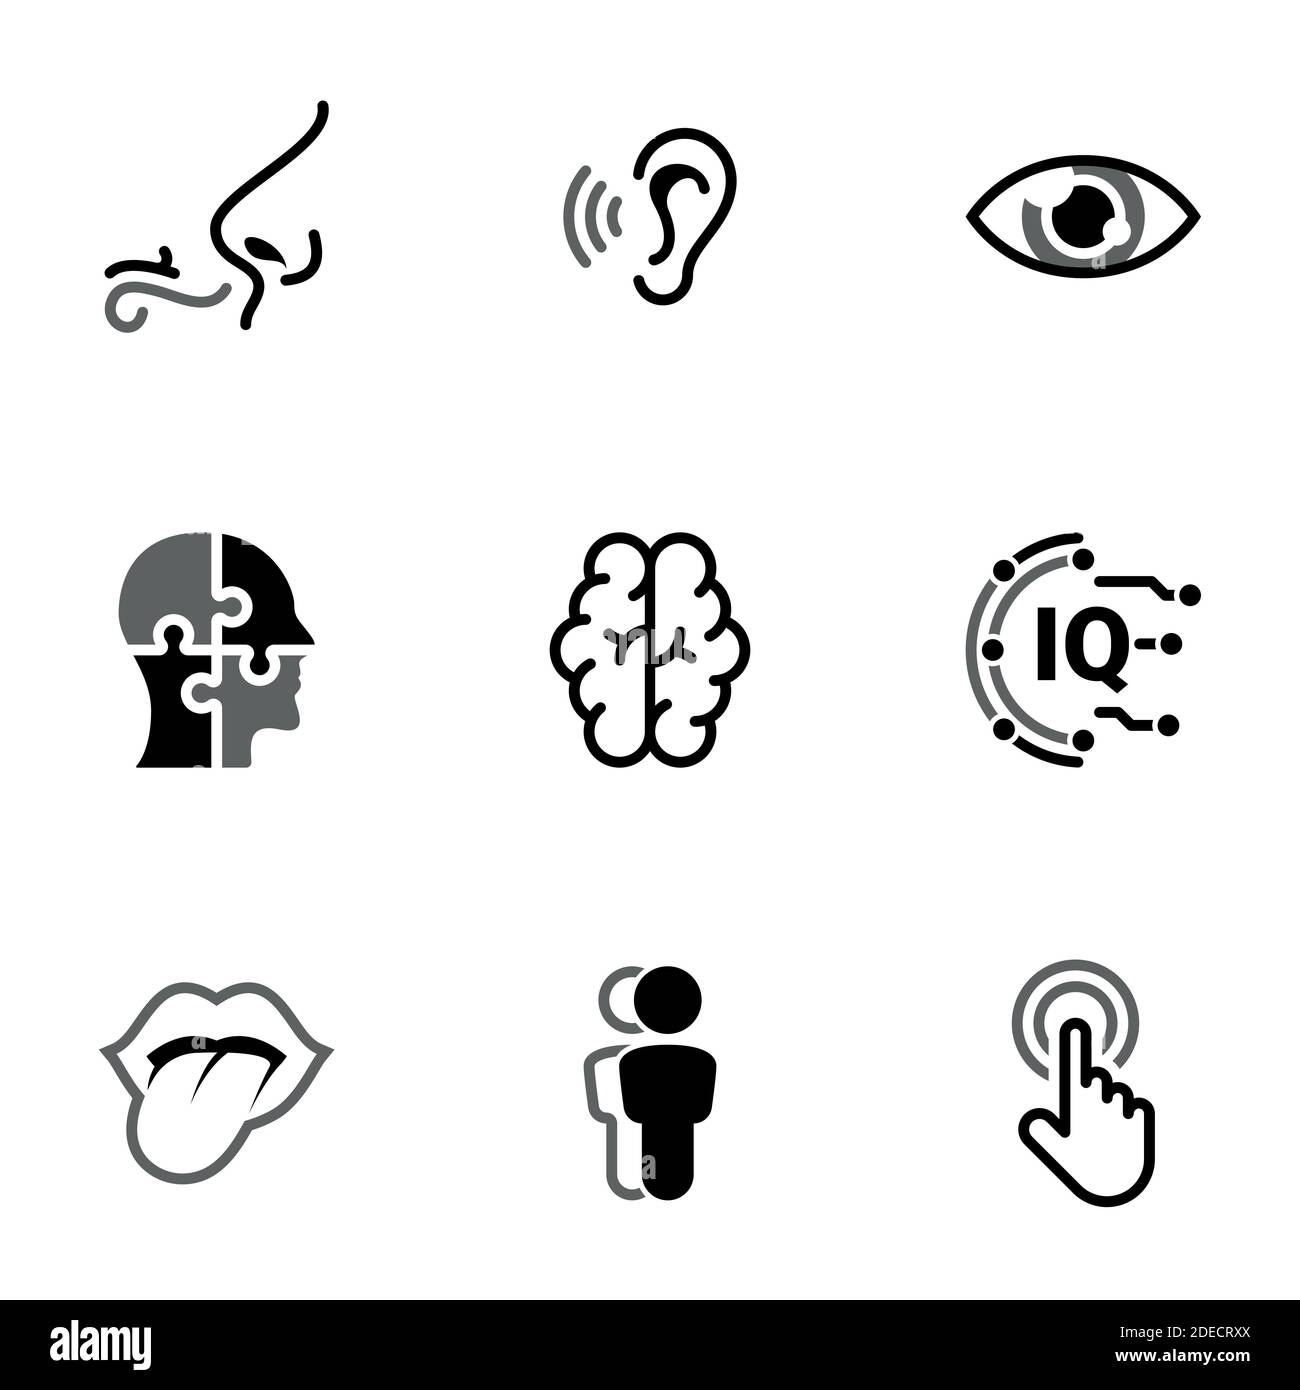 Set of simple icons on a theme Sense organs, man, mind, processing, perception, intellect , vector, set. Black icons isolated against white background Stock Vector